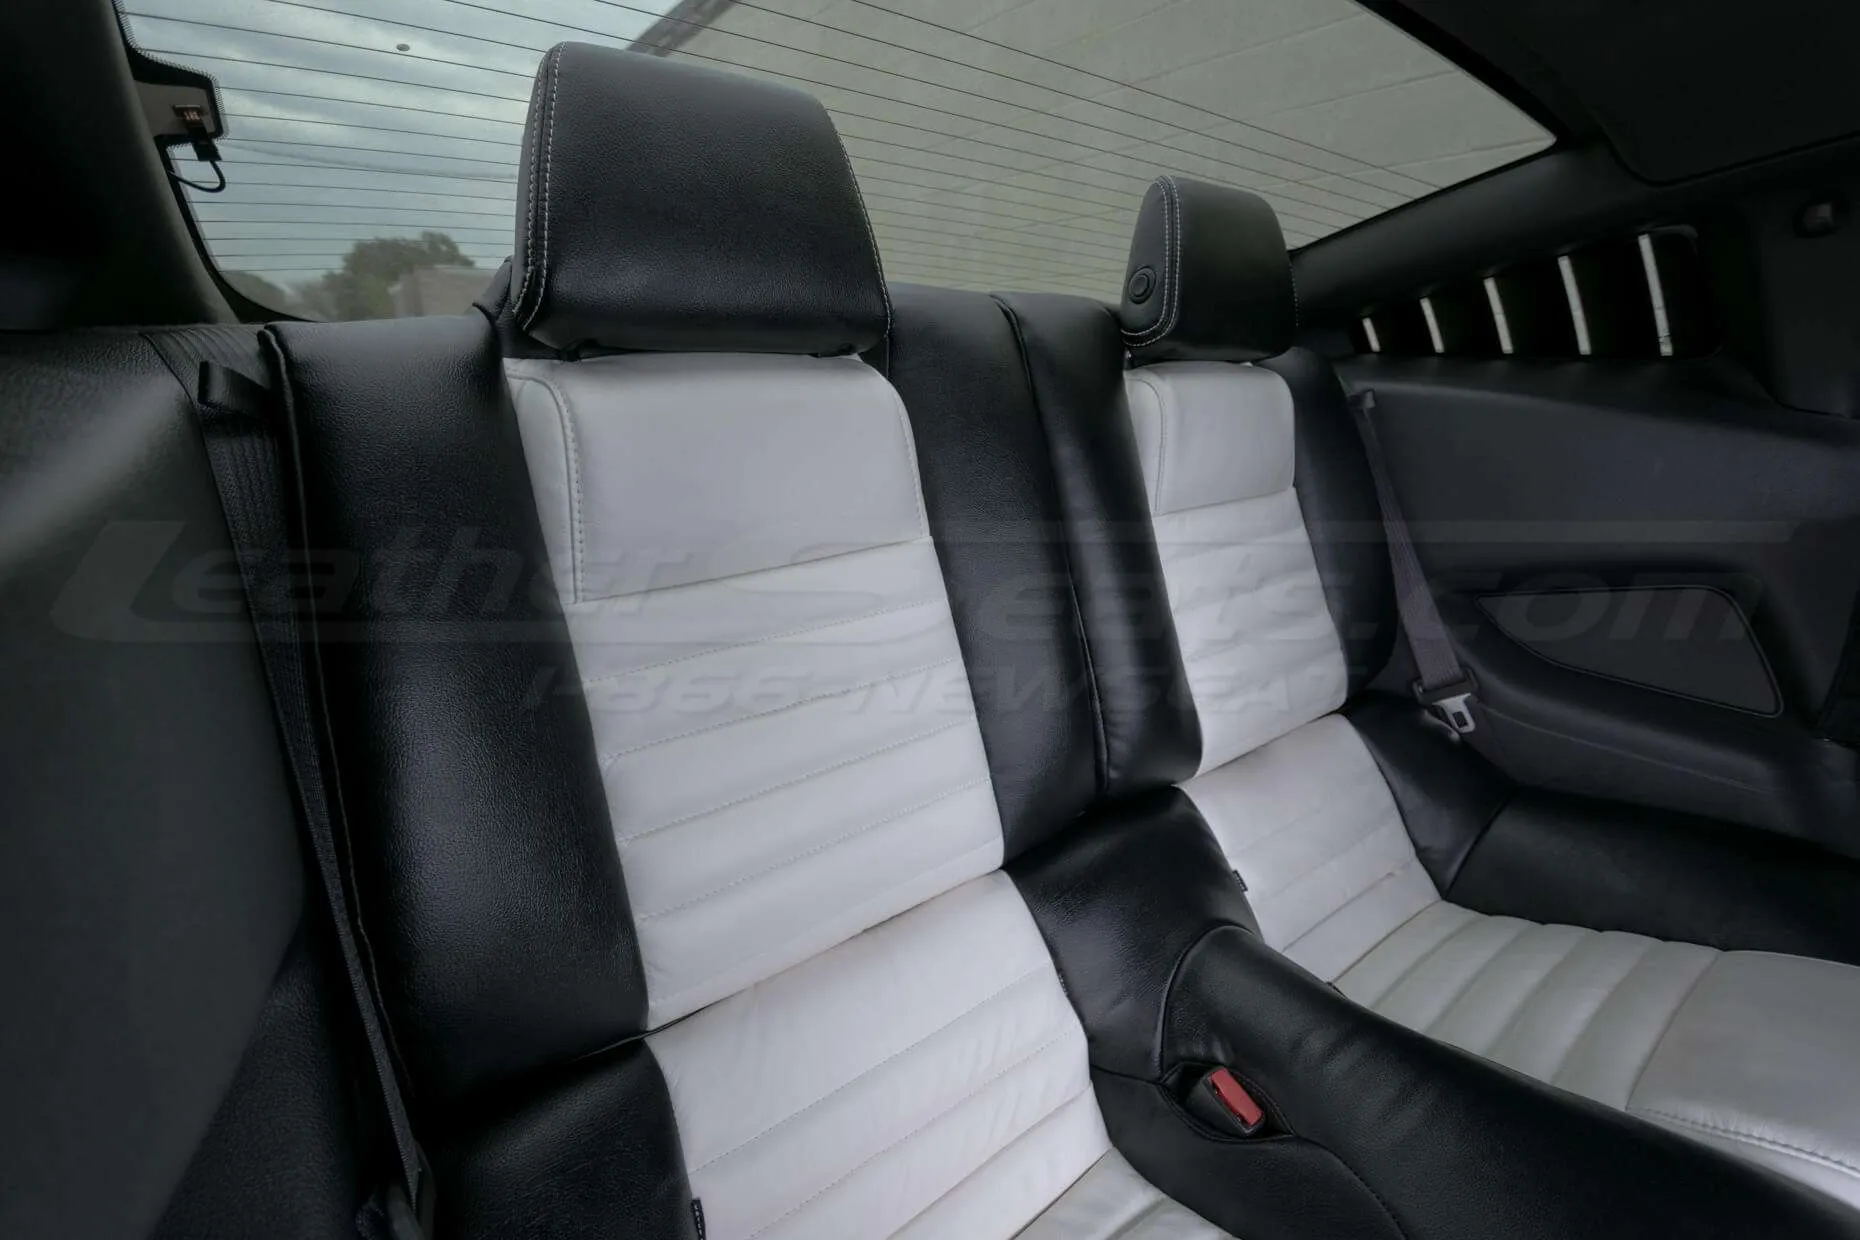 Ford Mustang installed leather kit - Black & White - Rear seats